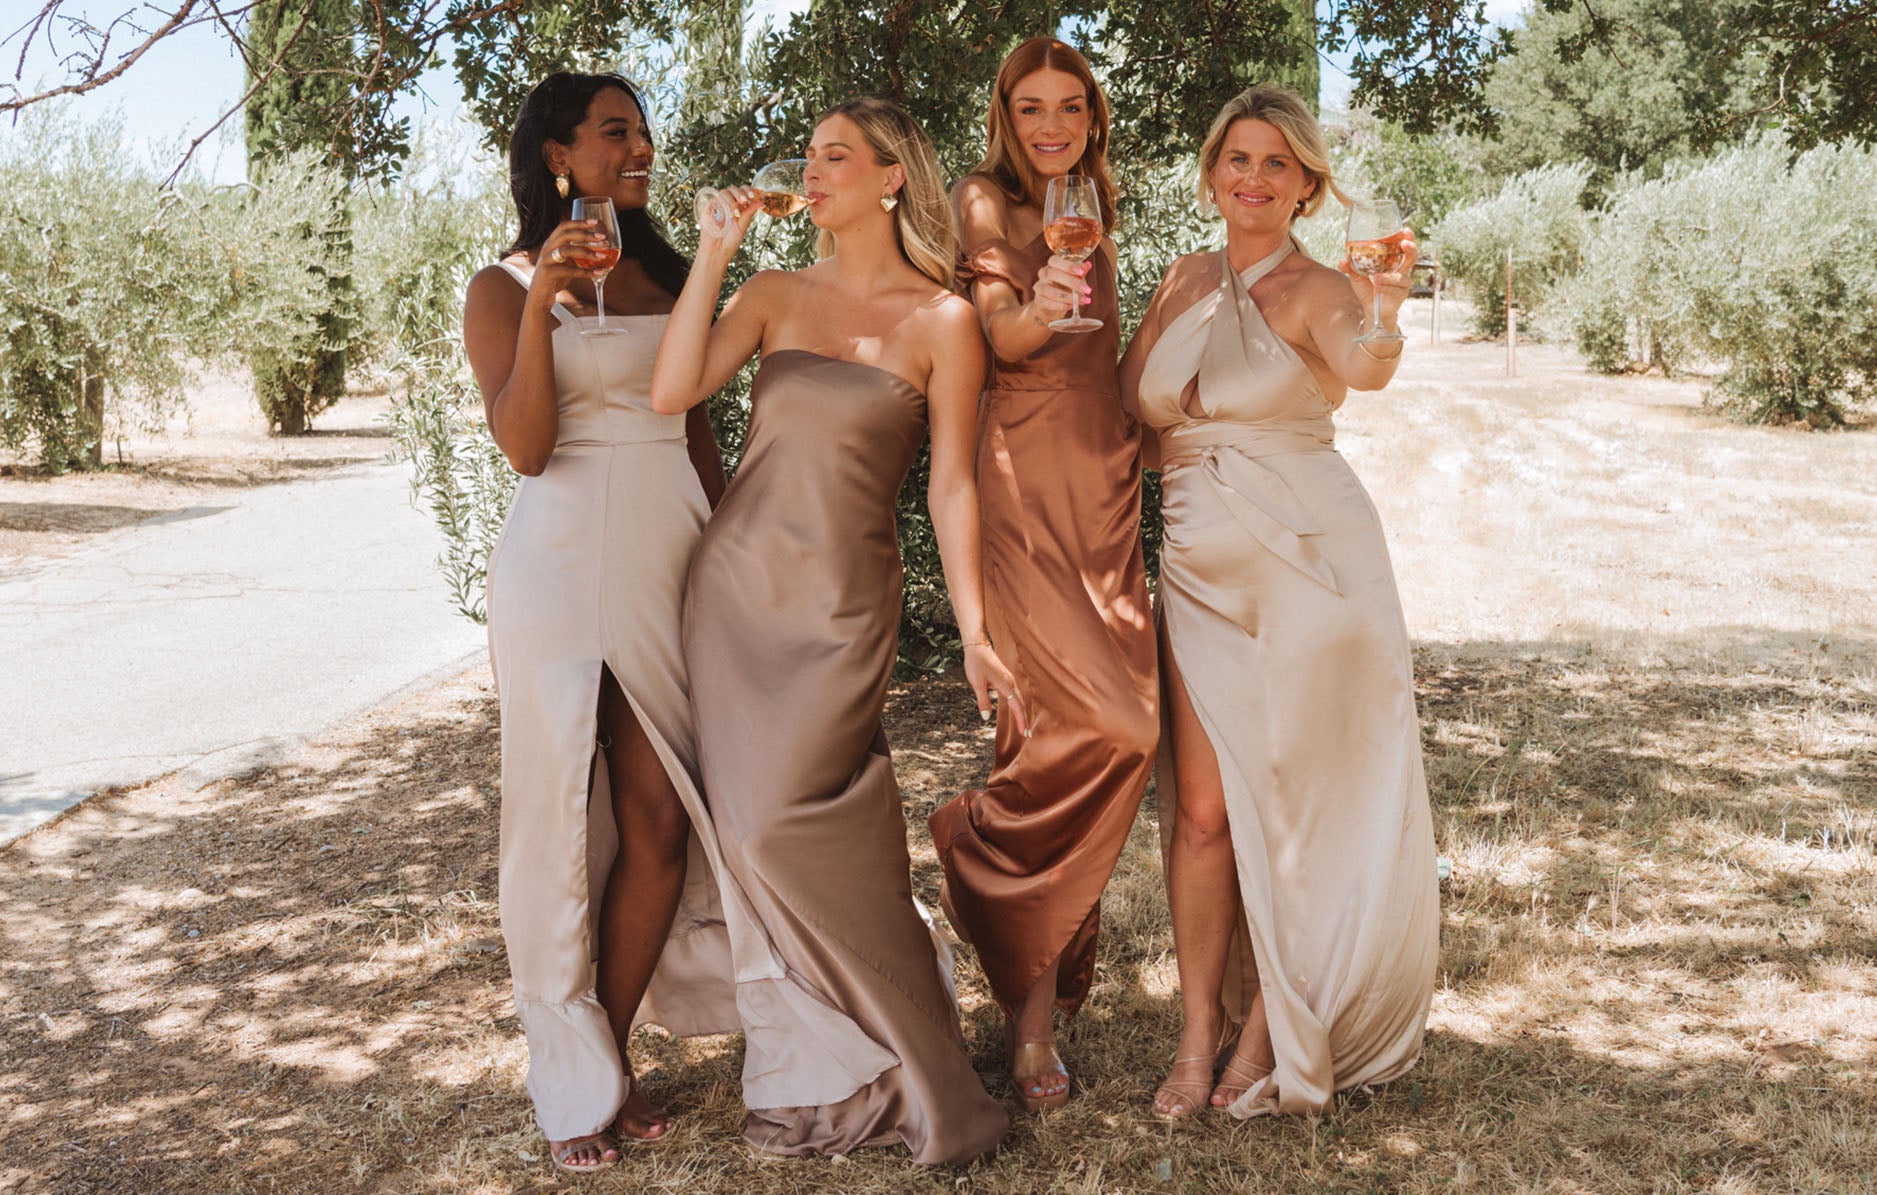 These 5 Fall Wedding Guest Styles Will Make You Look (Almost) As Good As the Bride